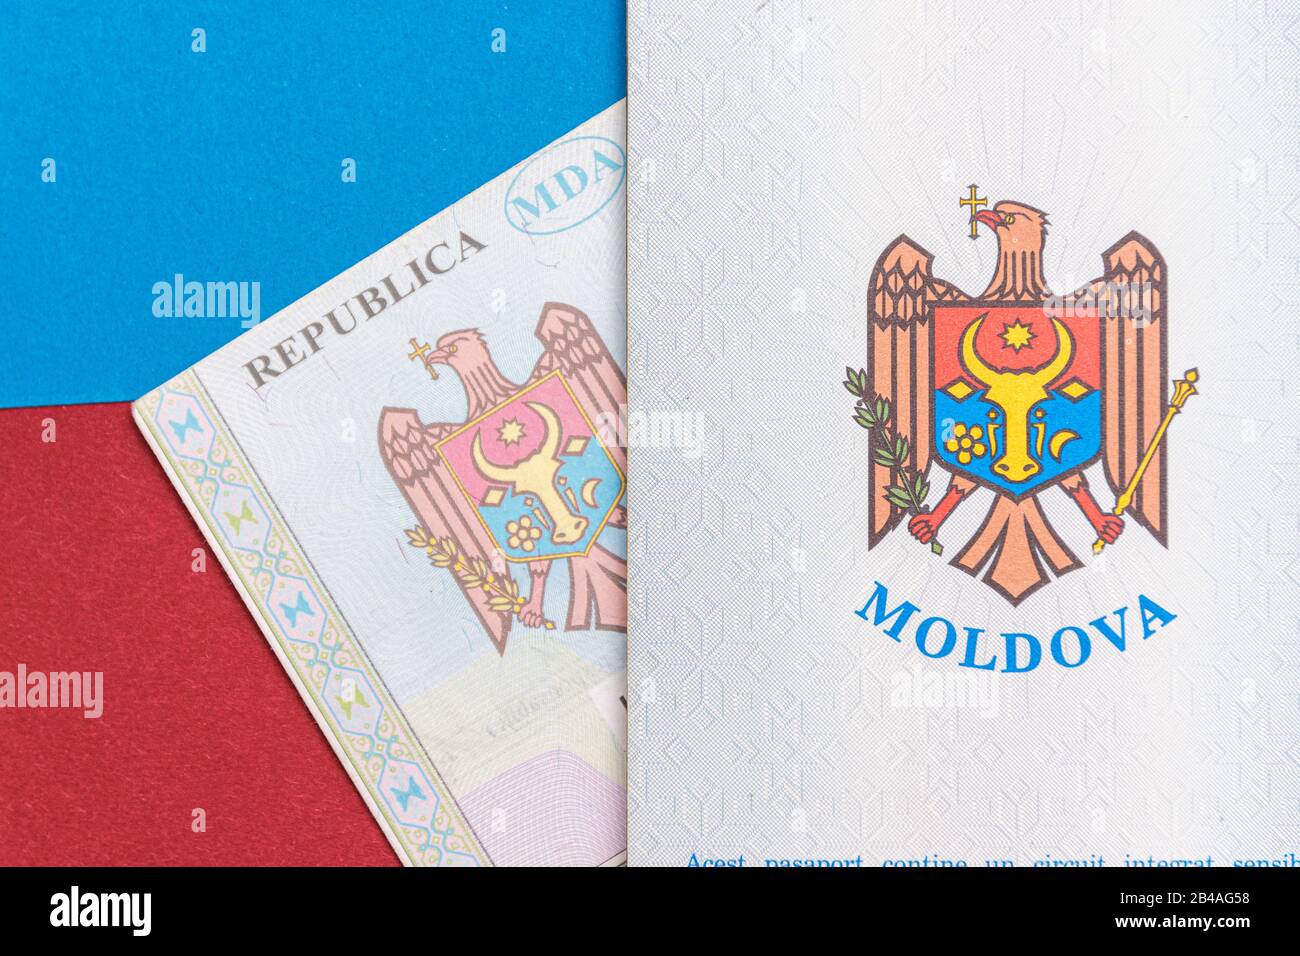 Republic of Moldova concept. The Moldovan passport on a blue and red background. Coloseup of the emblem/coat of arms of Moldova. Moldova Finance and e Stock Photo